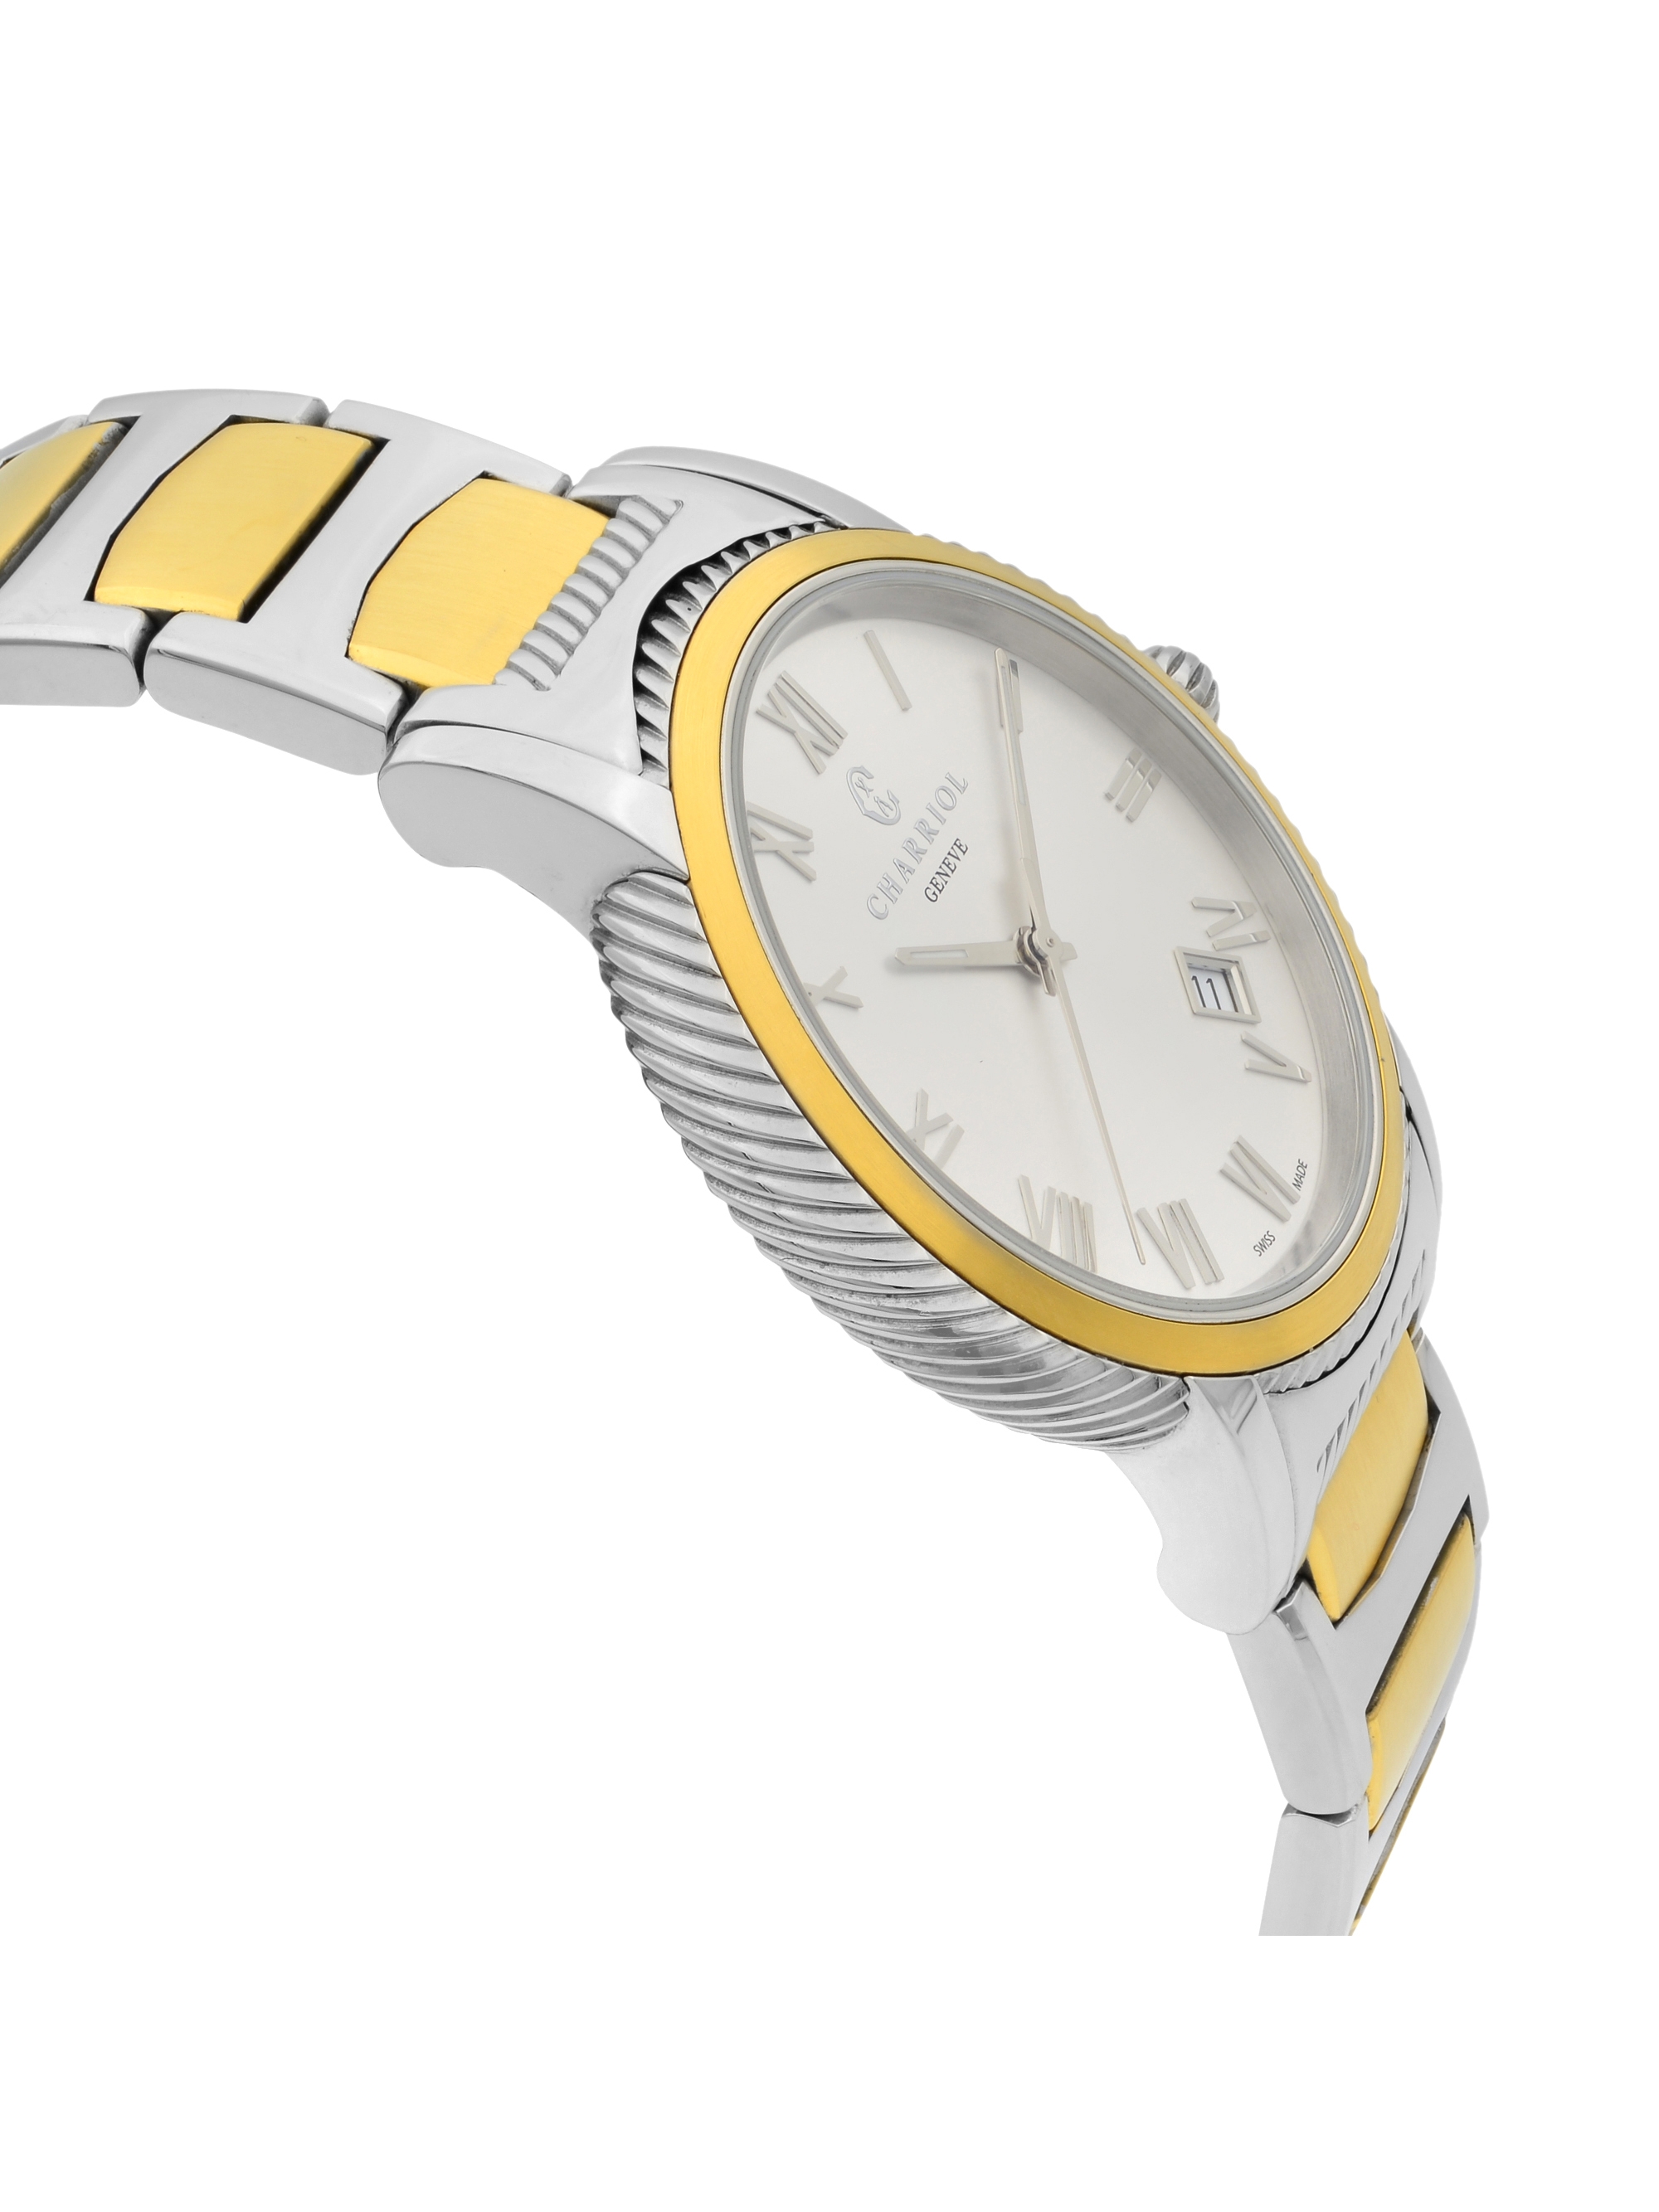 Charriol Parisii Two Tone Steel Silver Dial Quartz Unisex Watch P40SY2.931.001 Pre-Owned - image 4 of 6